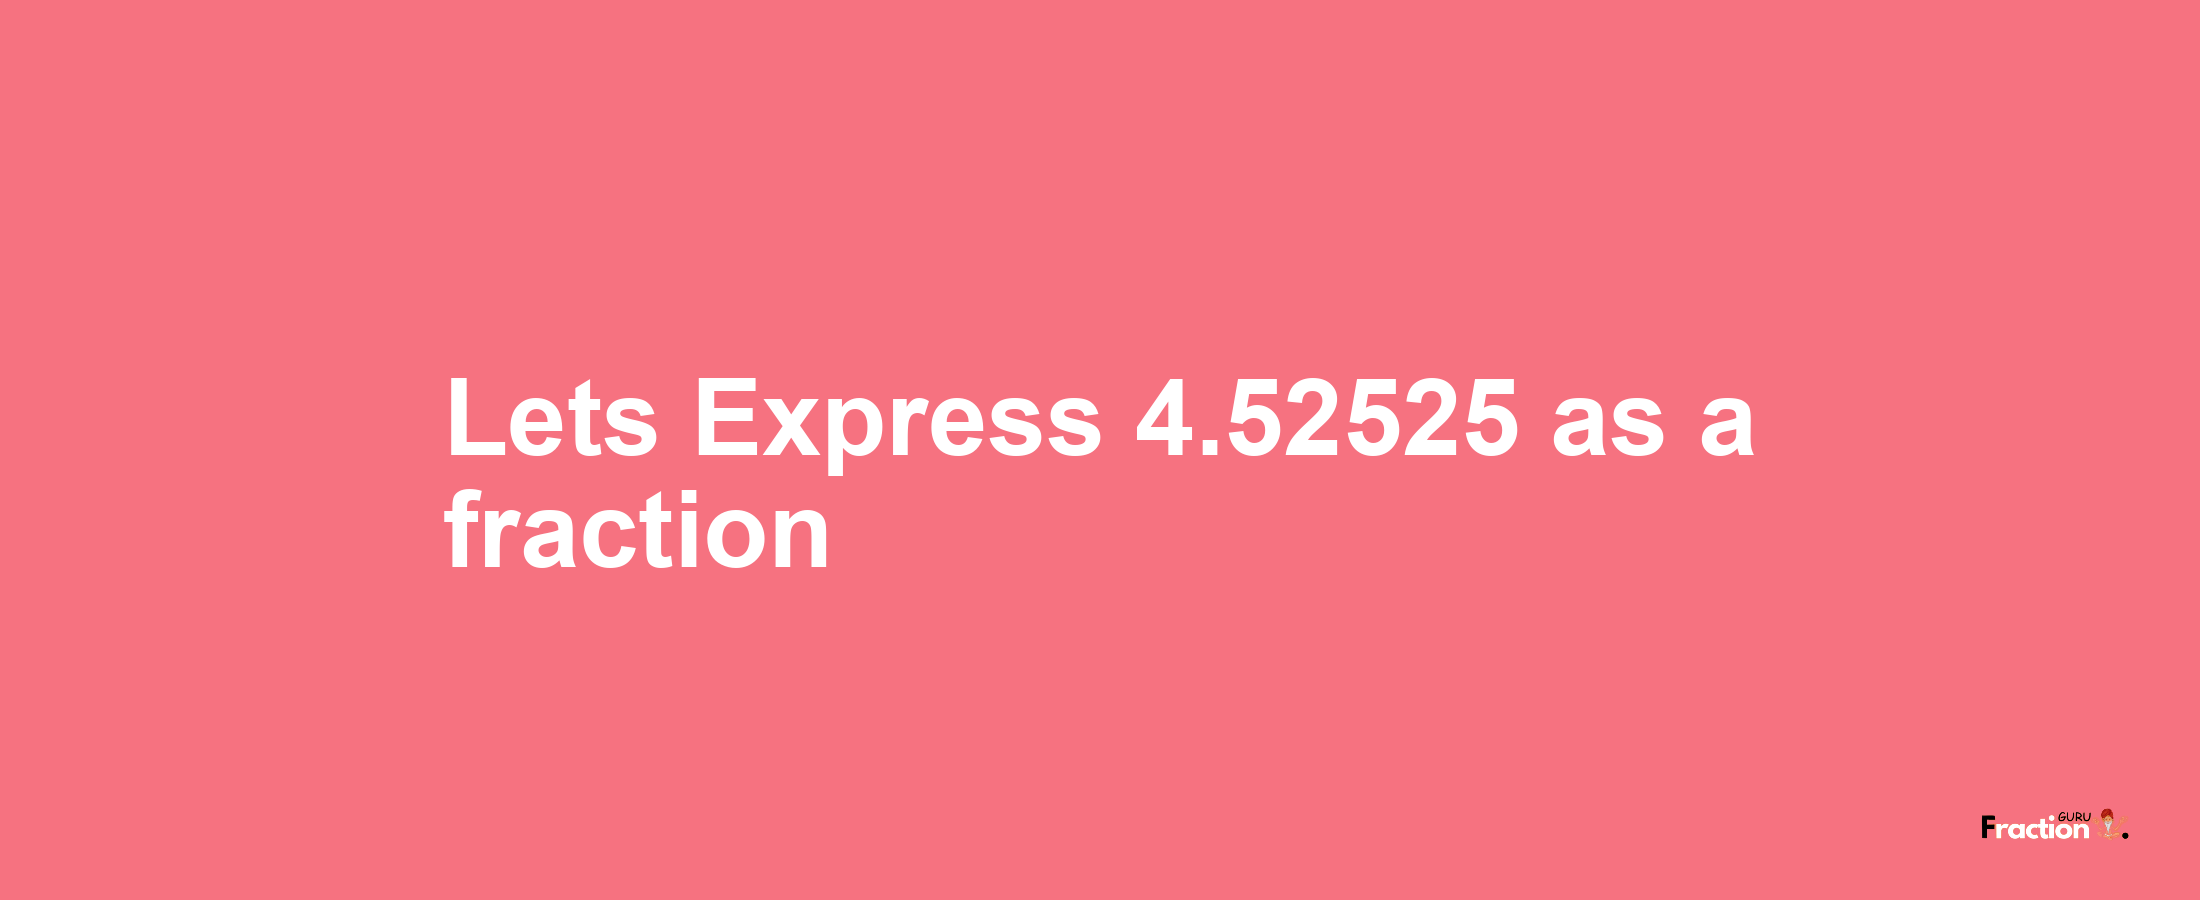 Lets Express 4.52525 as afraction